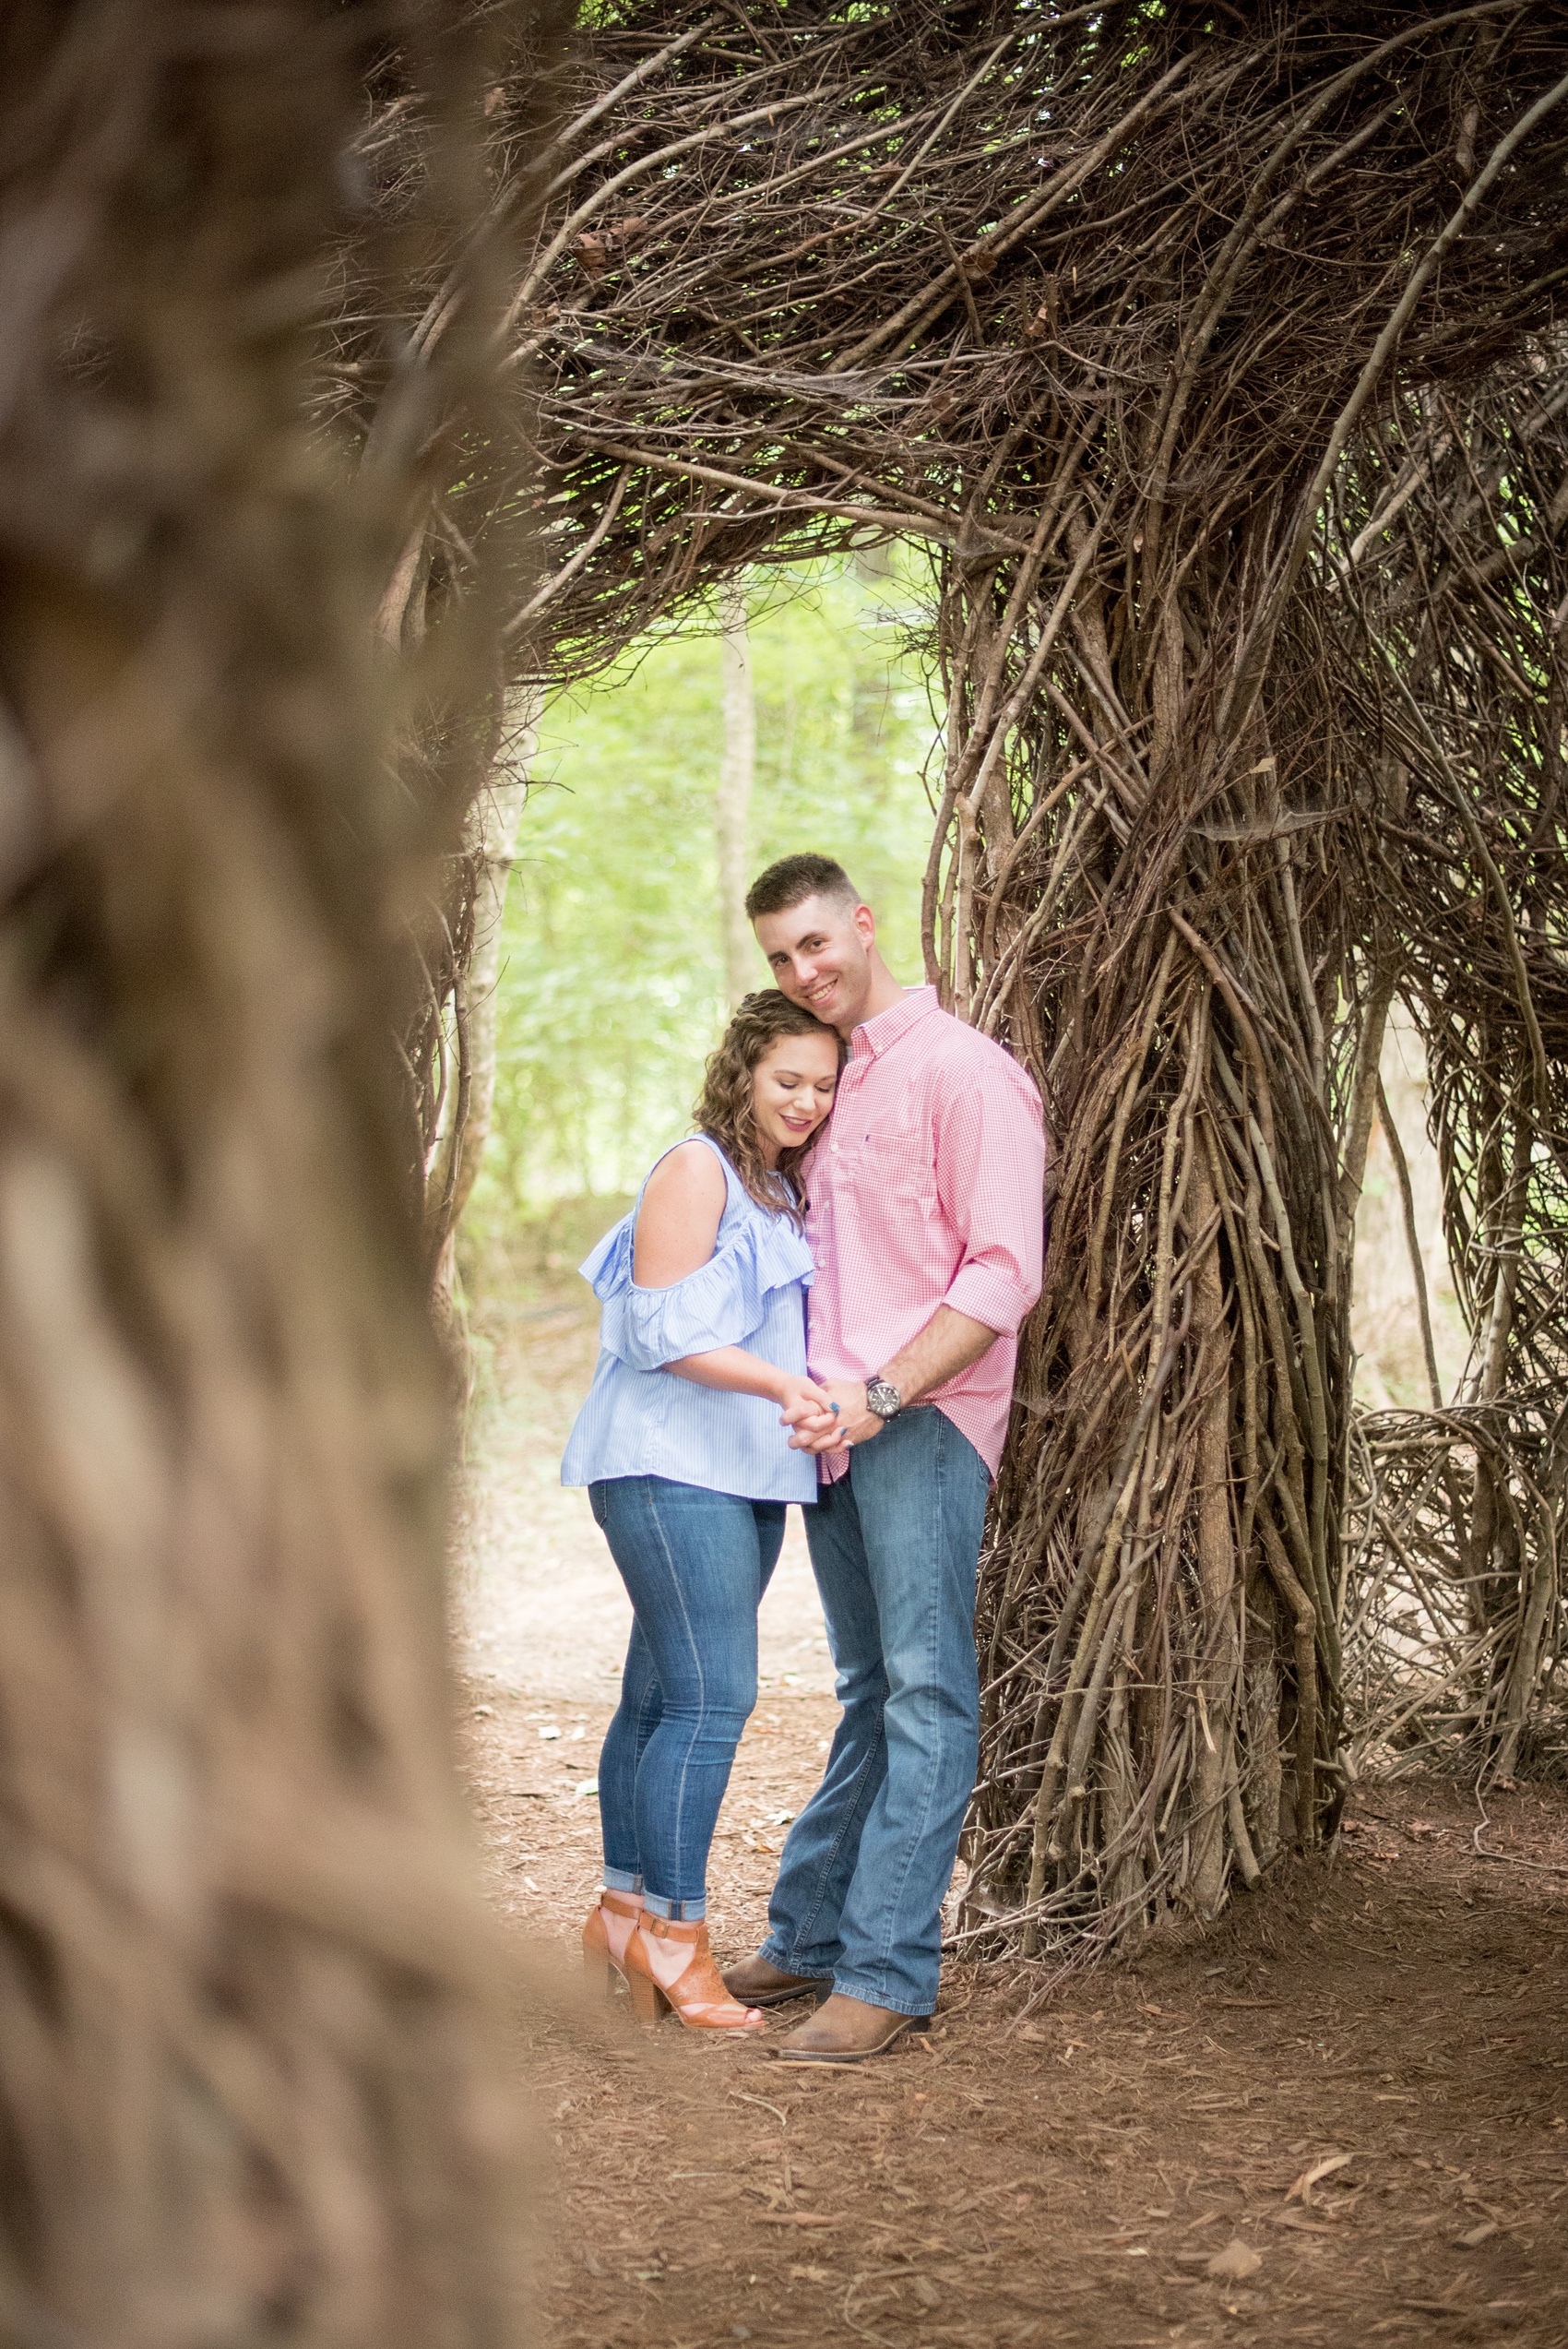 Mikkel Paige Photography photos of an engagement session at Eno Riverwalk in Hillsborough, North Carolina. Picture of bride and groom in a Stick Art sculpture created from branches.